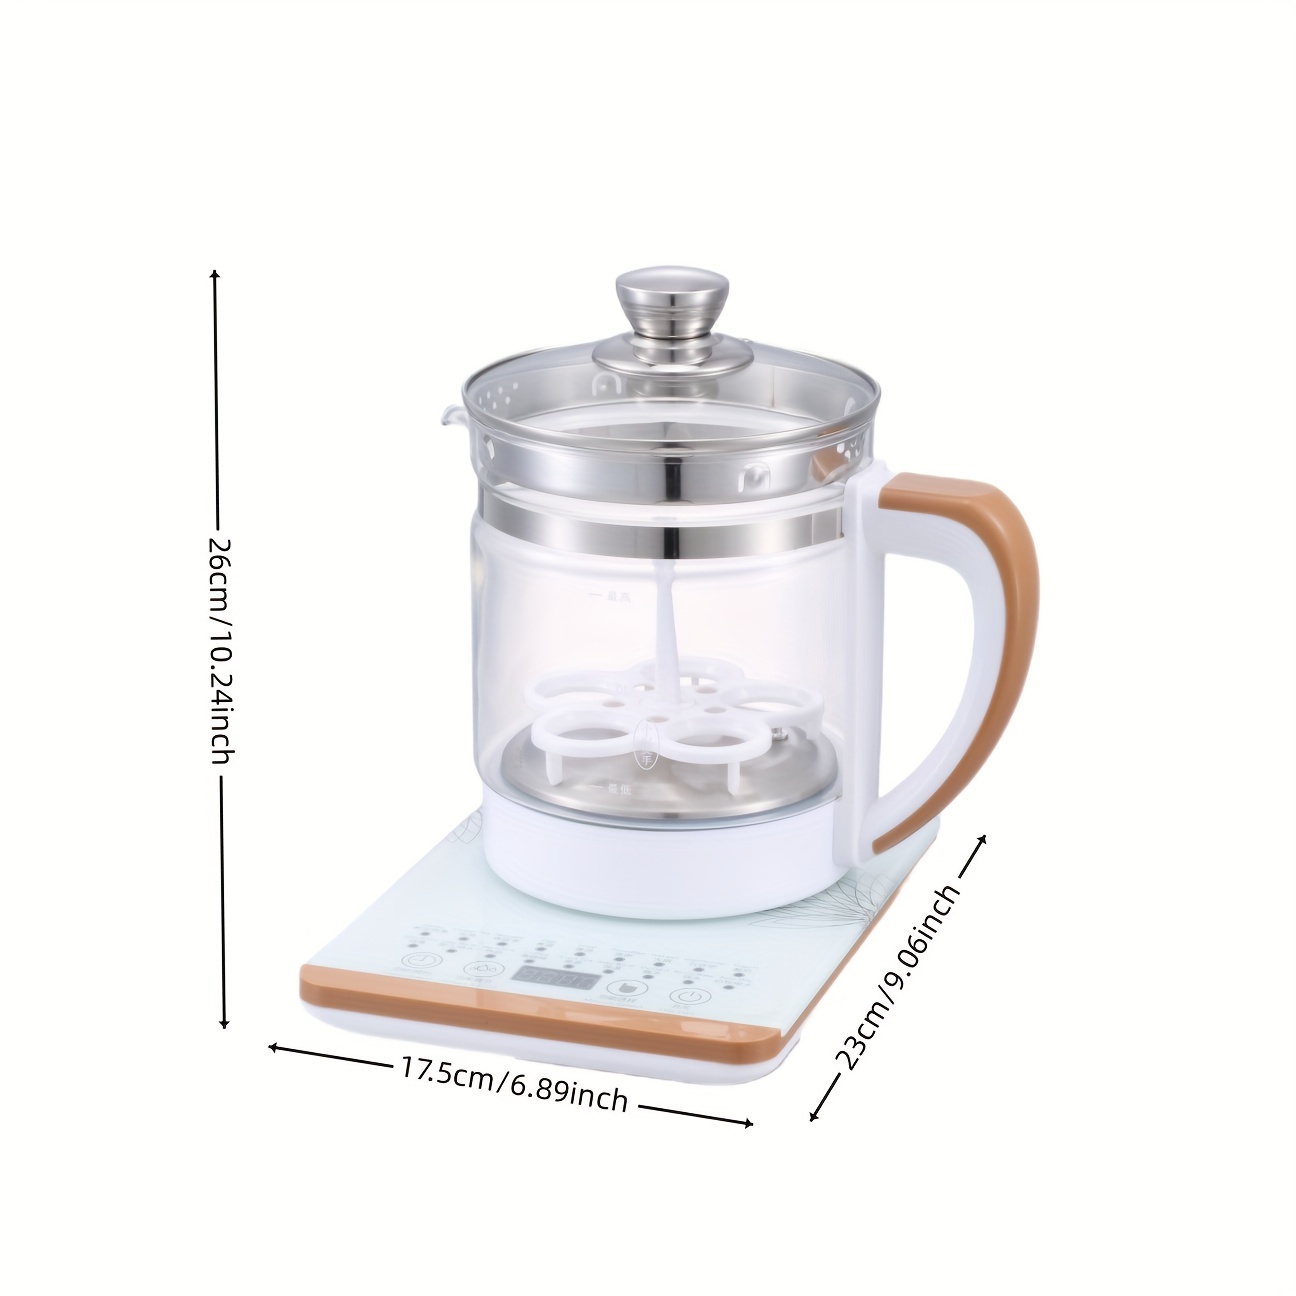 Multifunctional Electric Kettle - 1.1-2.5L Health Pot, Tea Maker, Decoction  Pot - Food-Grade Stainless Steel for Safe and Healthy Boiling